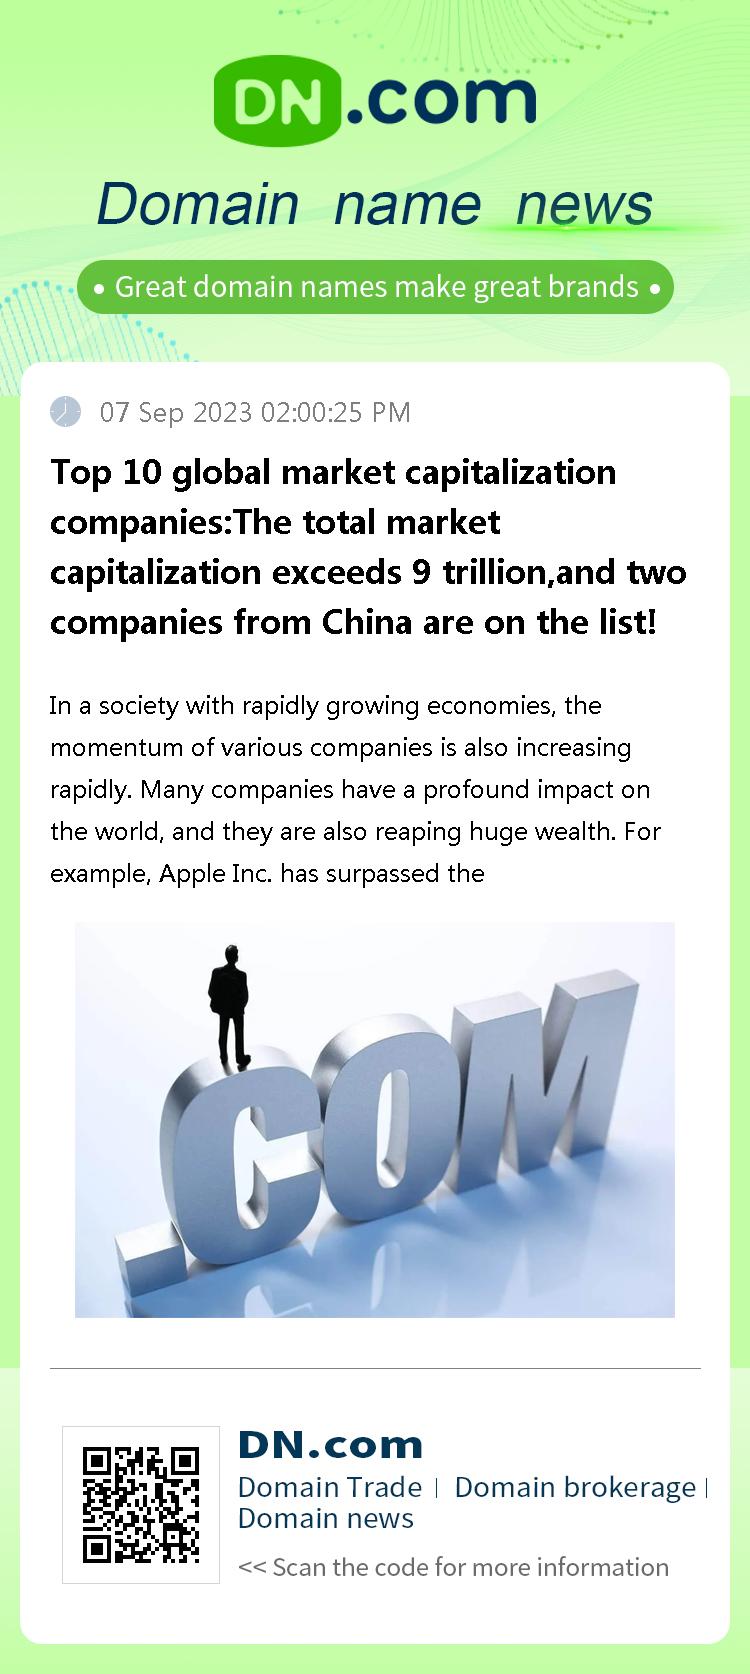 Top 10 global market capitalization companies:The total market capitalization exceeds 9 trillion,and two companies from China are on the list!